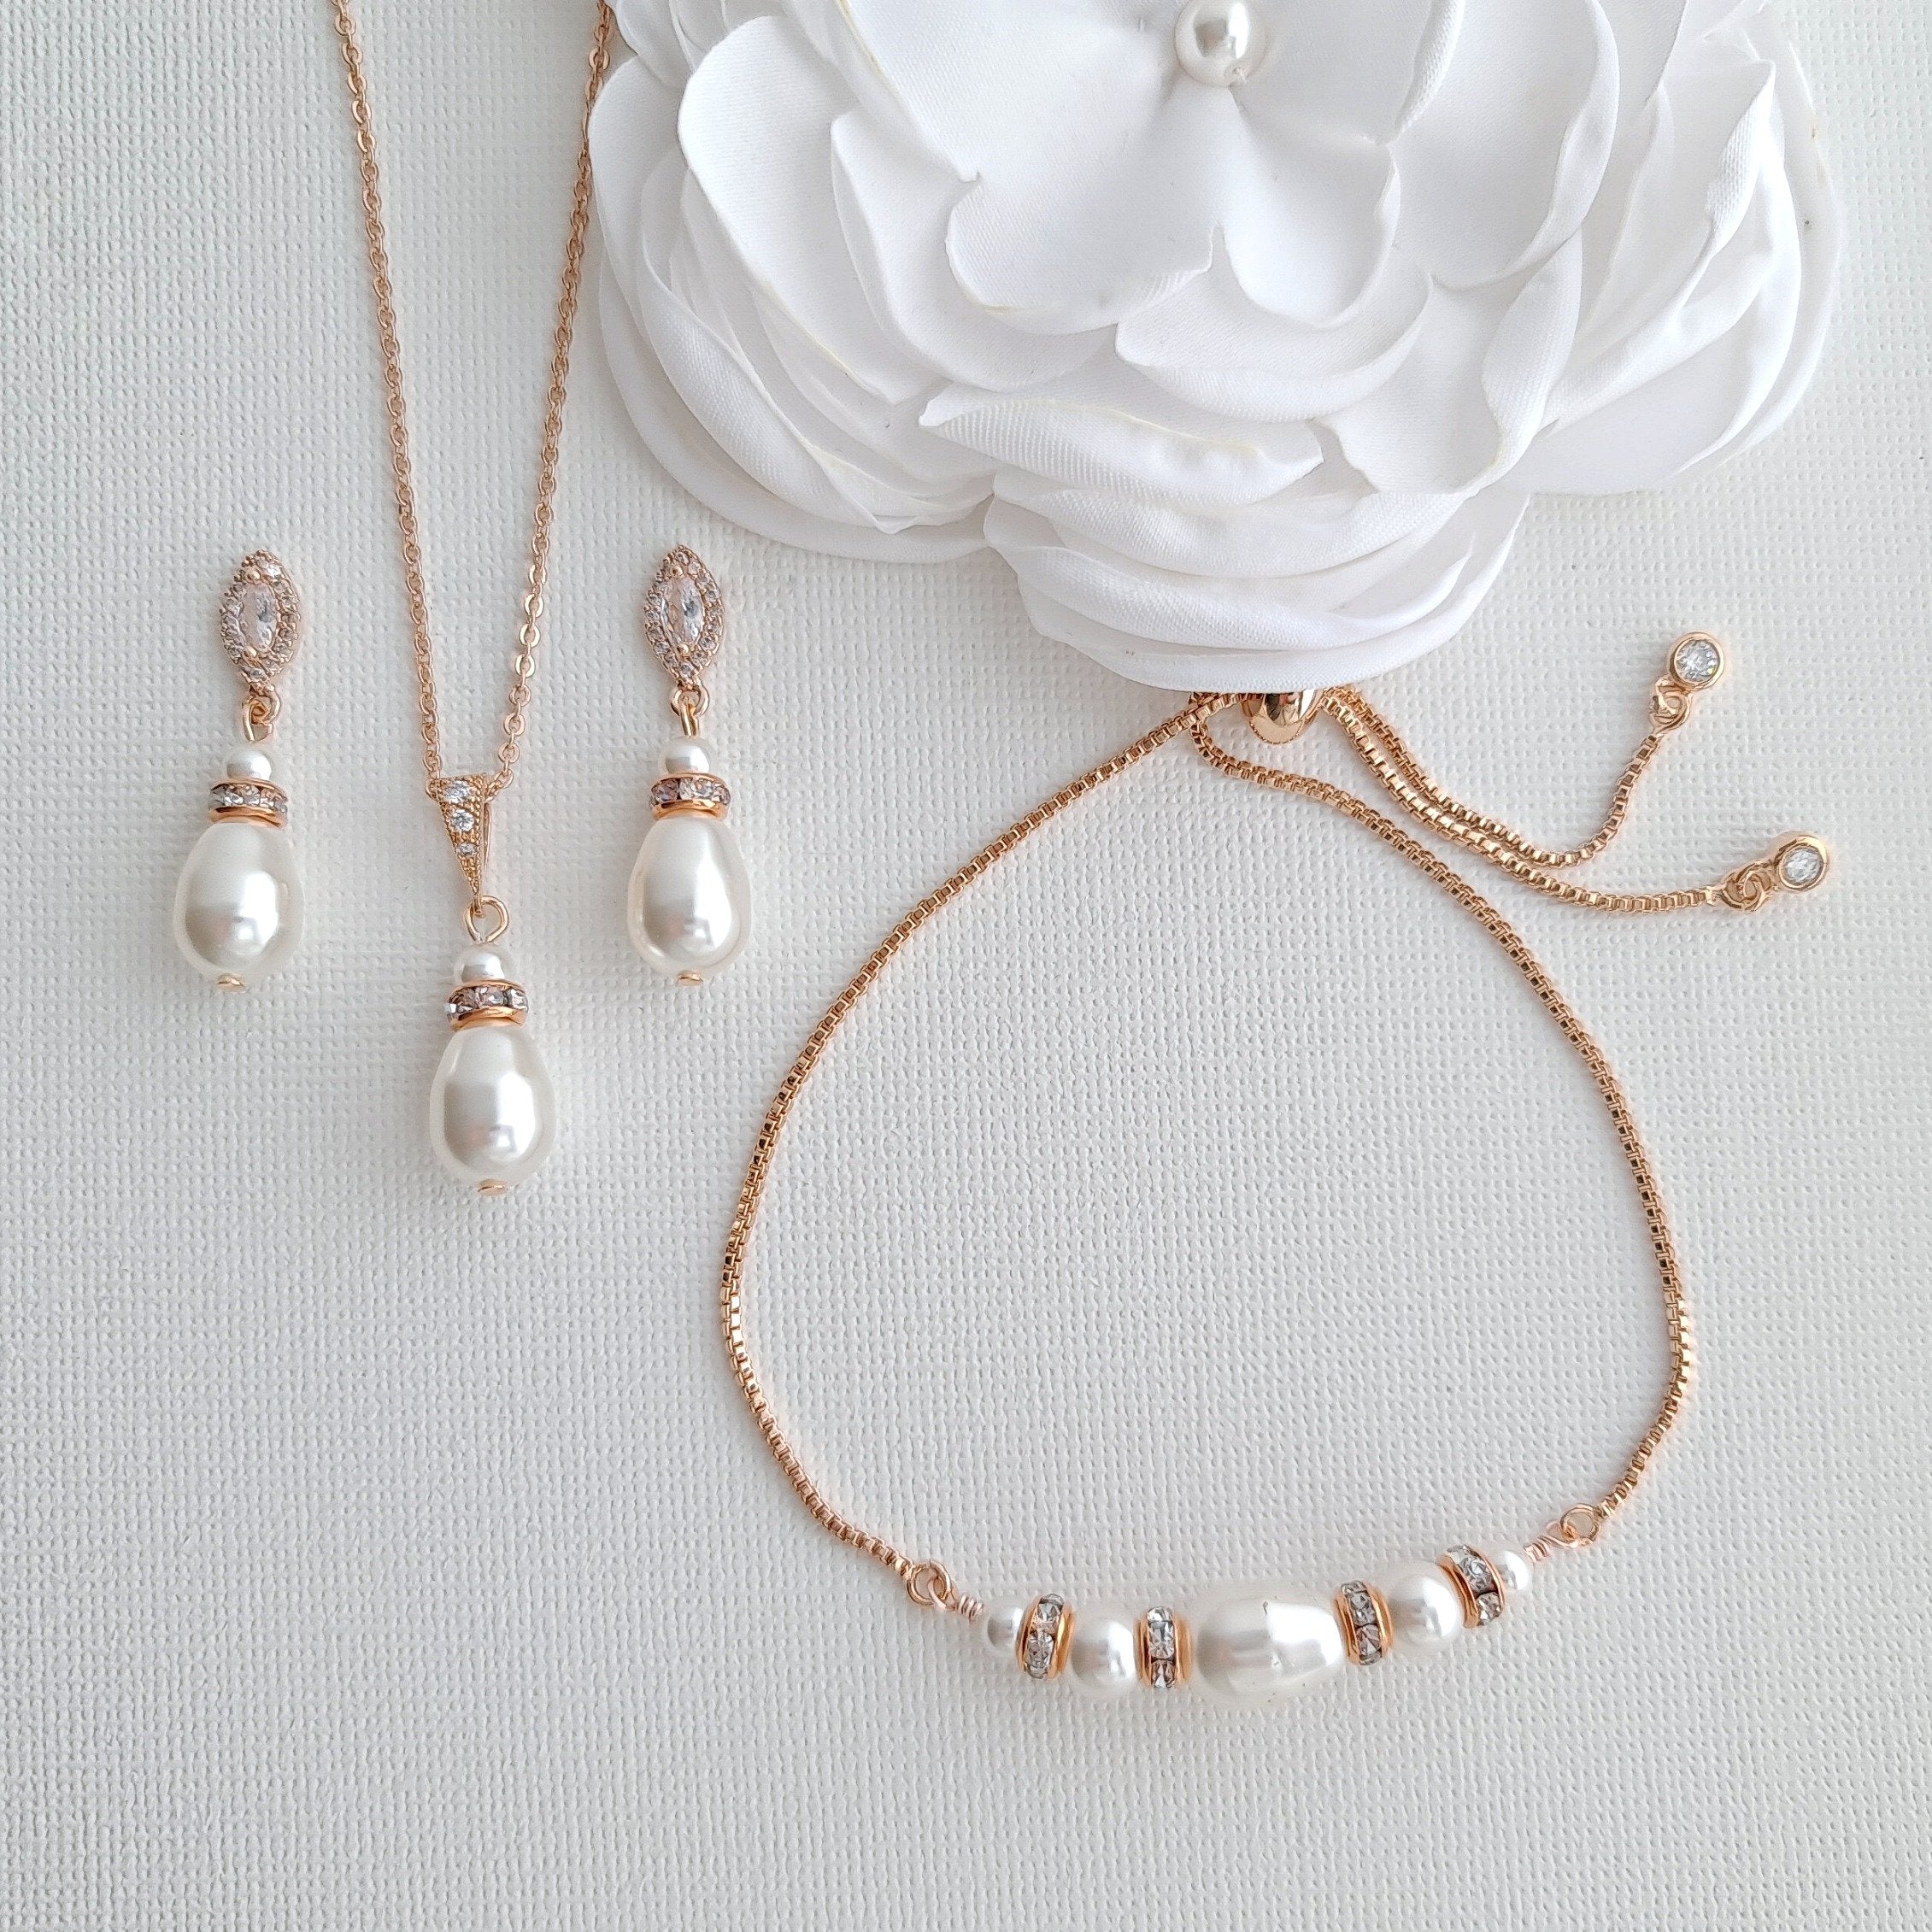 Vintage Pearl Earrings and Pendant Necklace Set - Cassandra Lynne